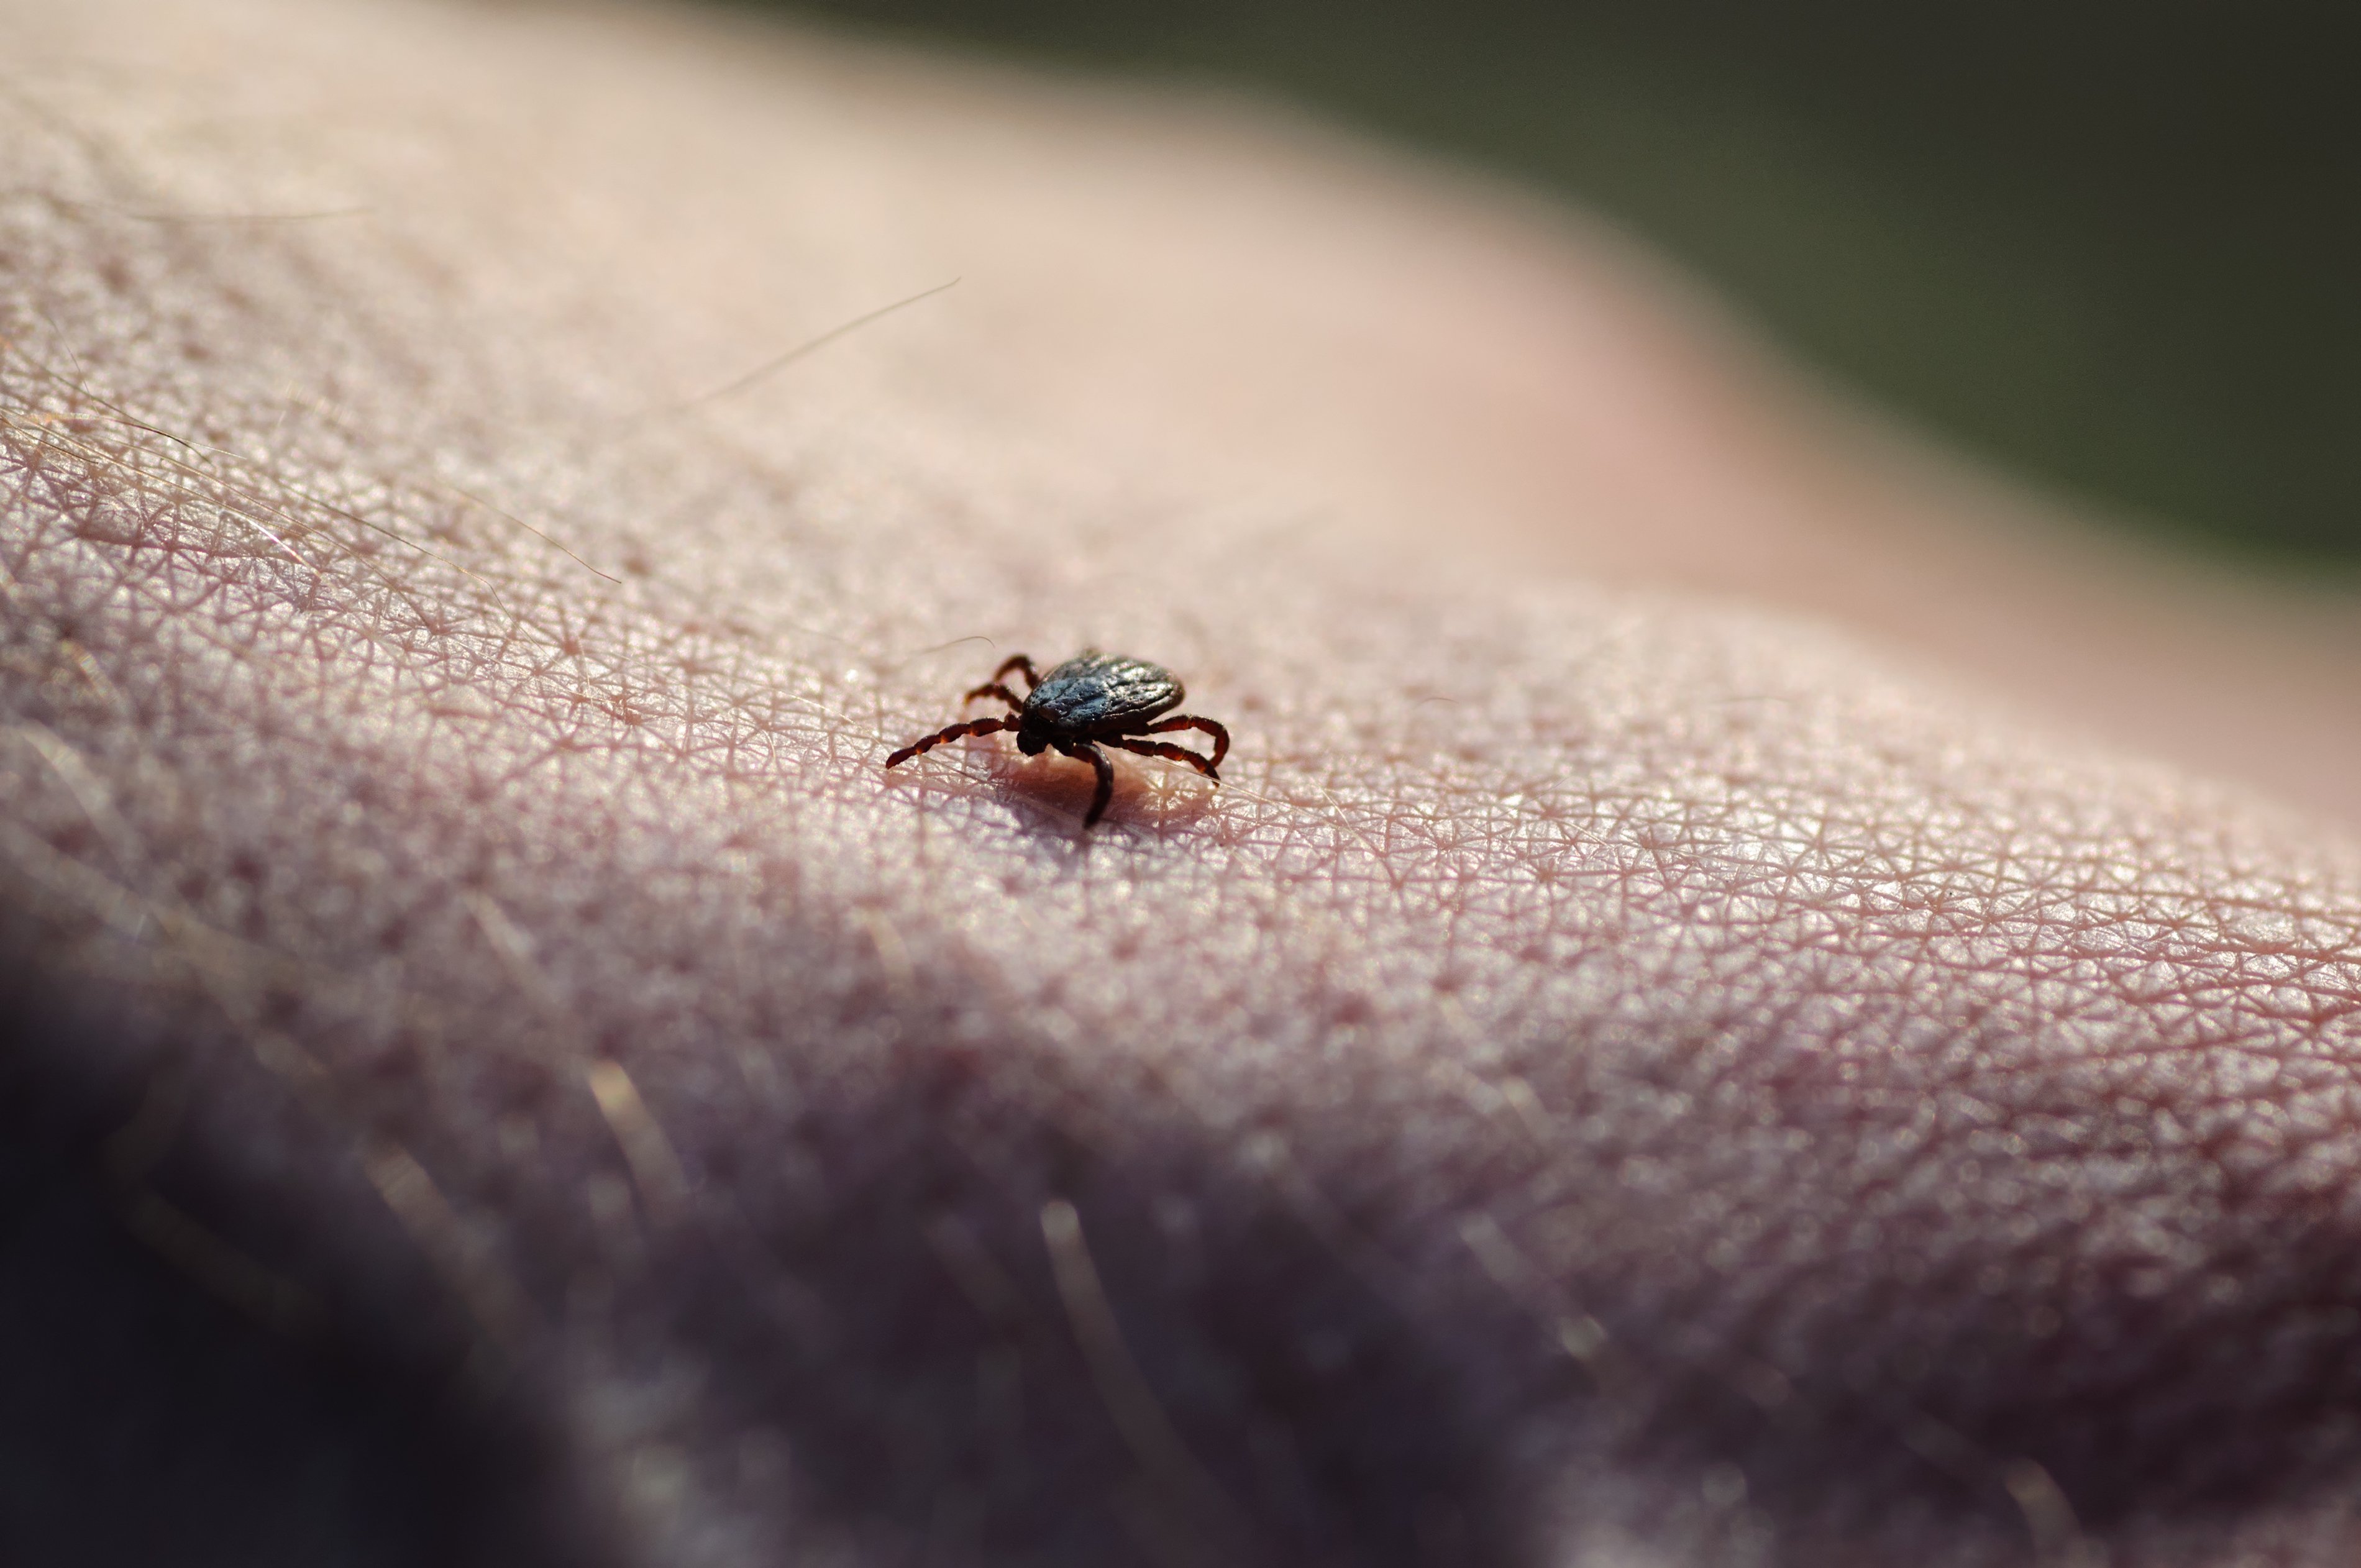 Tick Season Has Arrived In Ottawa - Featured Image